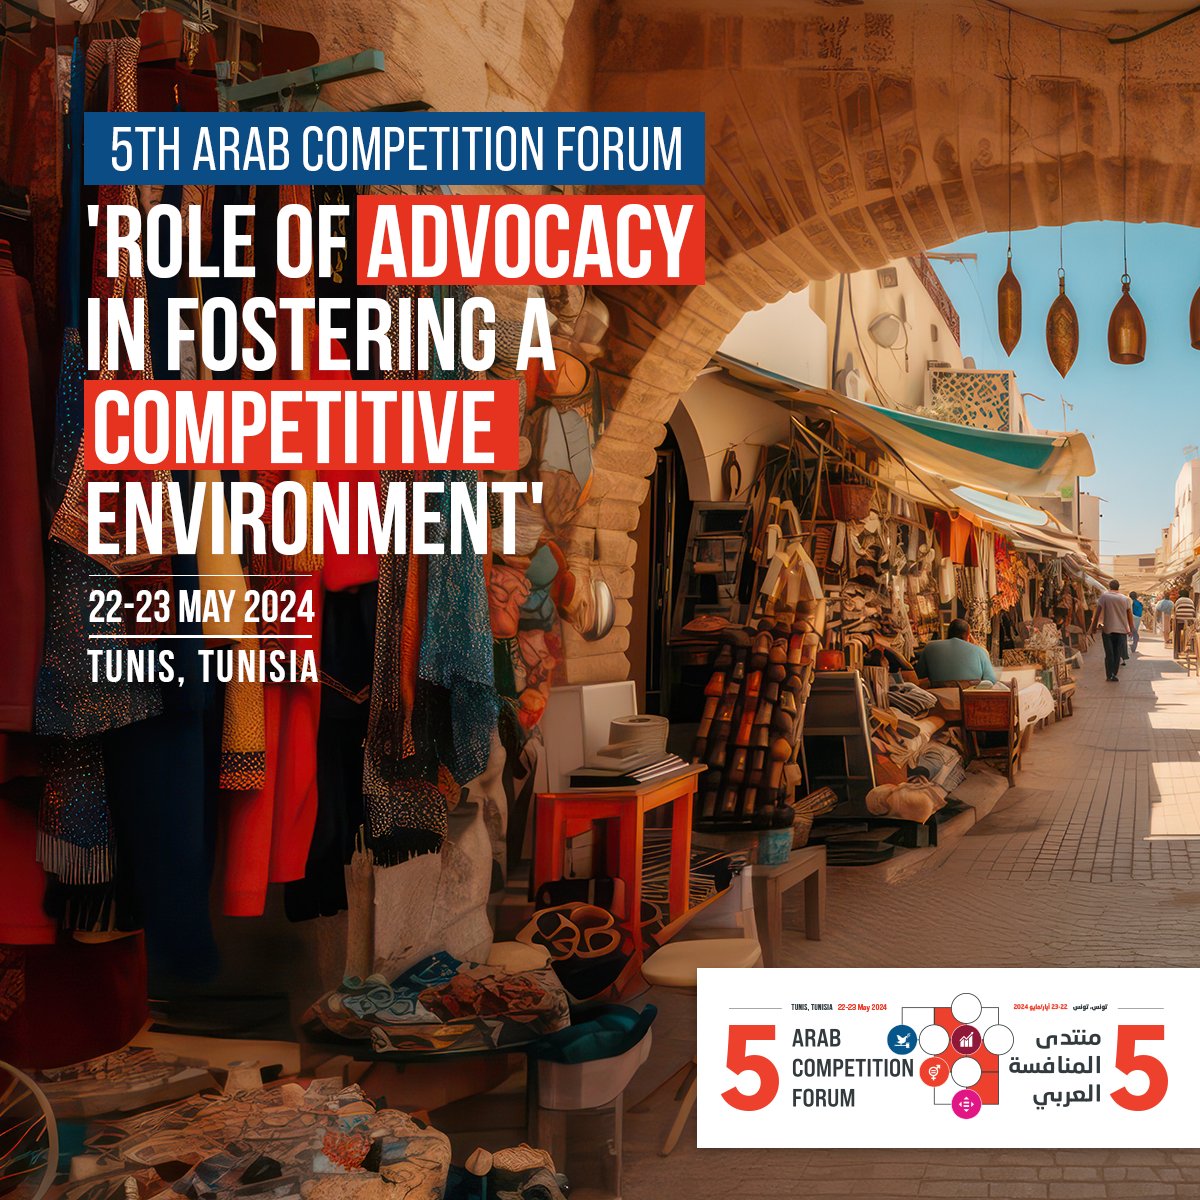 #ESCWA is organizing the 5th Arab Competition Forum in #Tunisia, in collaboration with @UNCTAD, @OECD, the Tunisian Competition Council, & the Competition Commission of @comesa_lusaka. Check the details here 👉 bit.ly/ACF2024-MAEN & stay tuned for more updates!